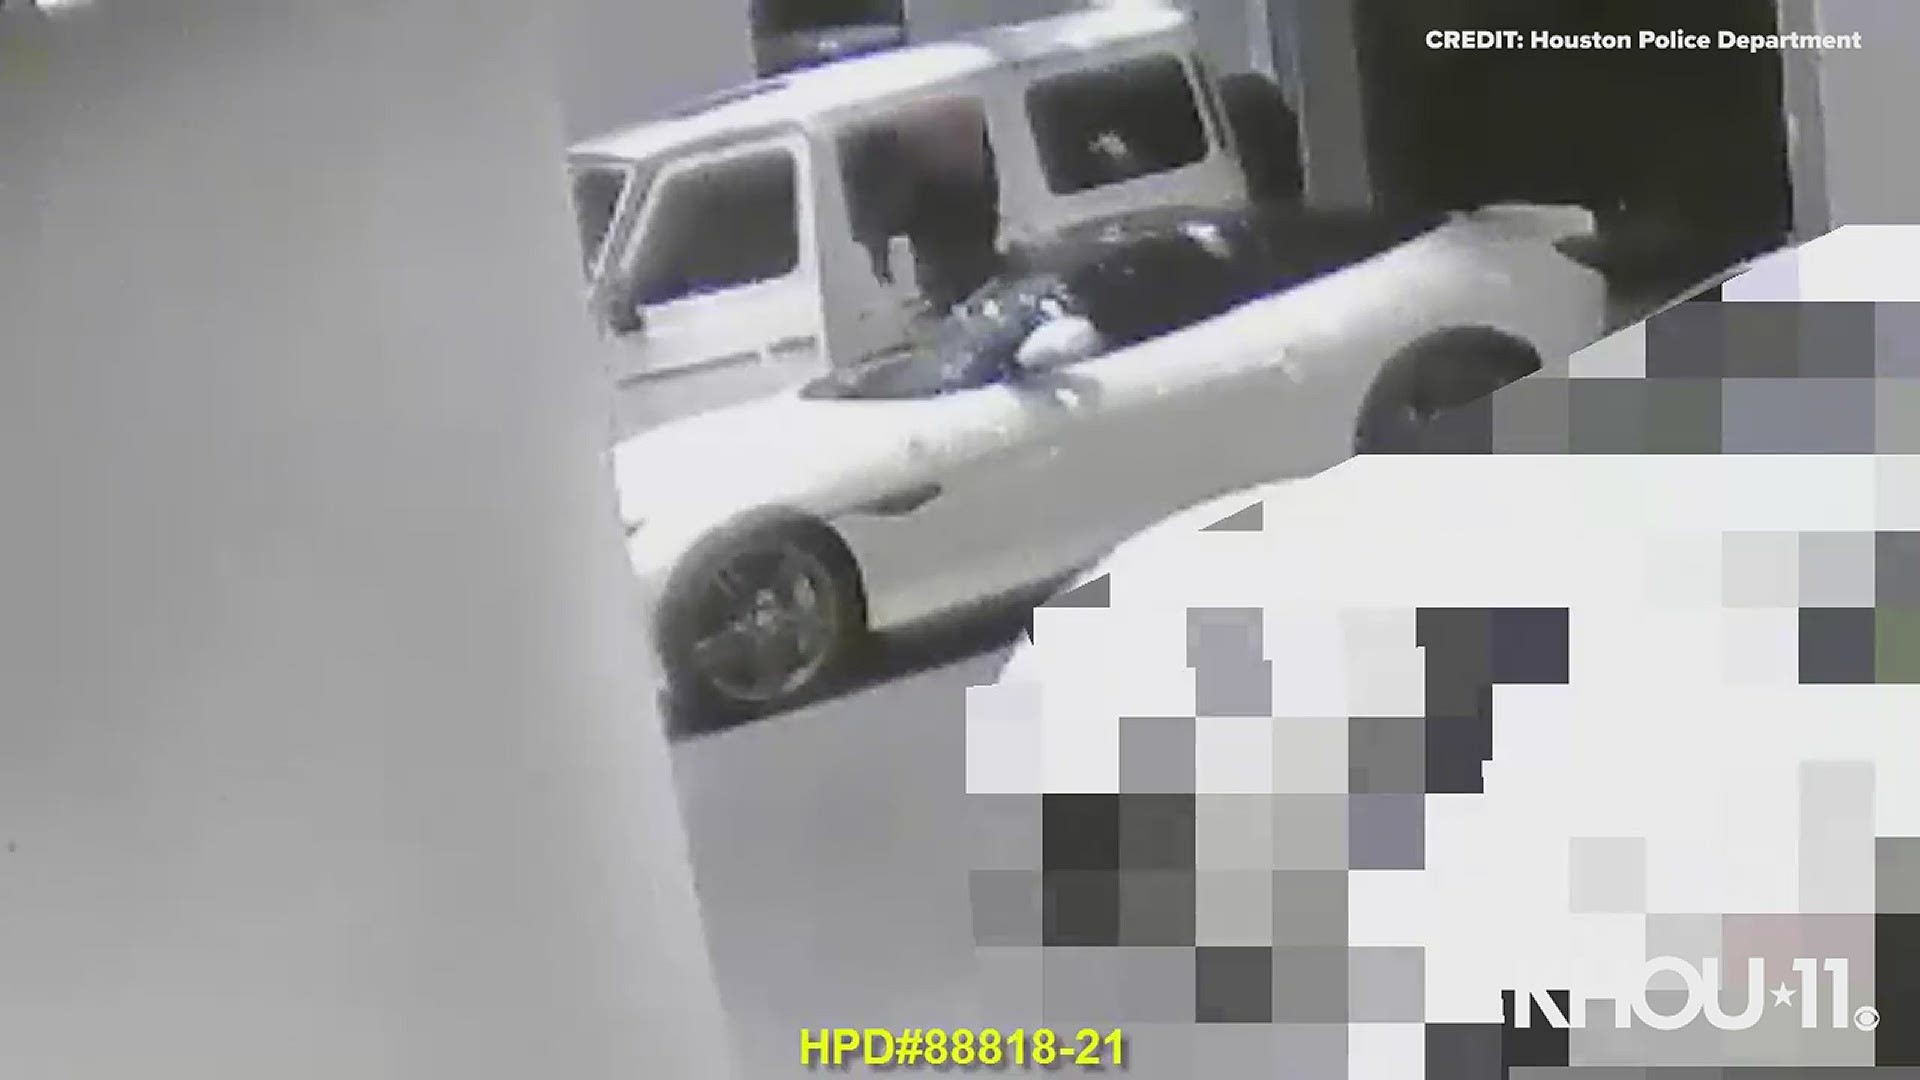 HPD released surveillance video of the assault which occurred happened in the 8000 block of Memorial.